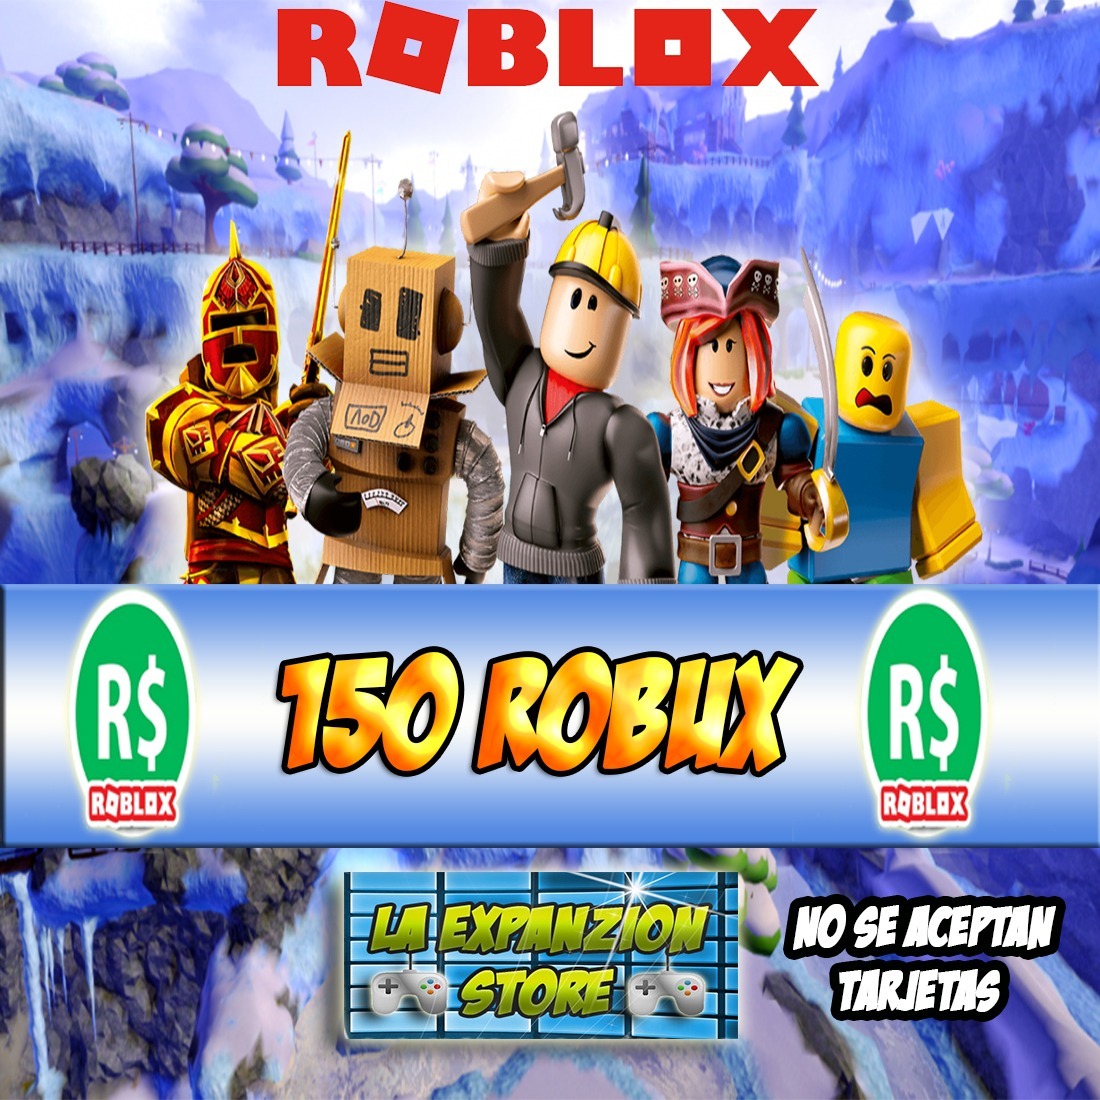 Donde Puedo Comprar Roblox Xbox 360 Free Robux Giveaway Live - figura roblox zombie attack pack microplay